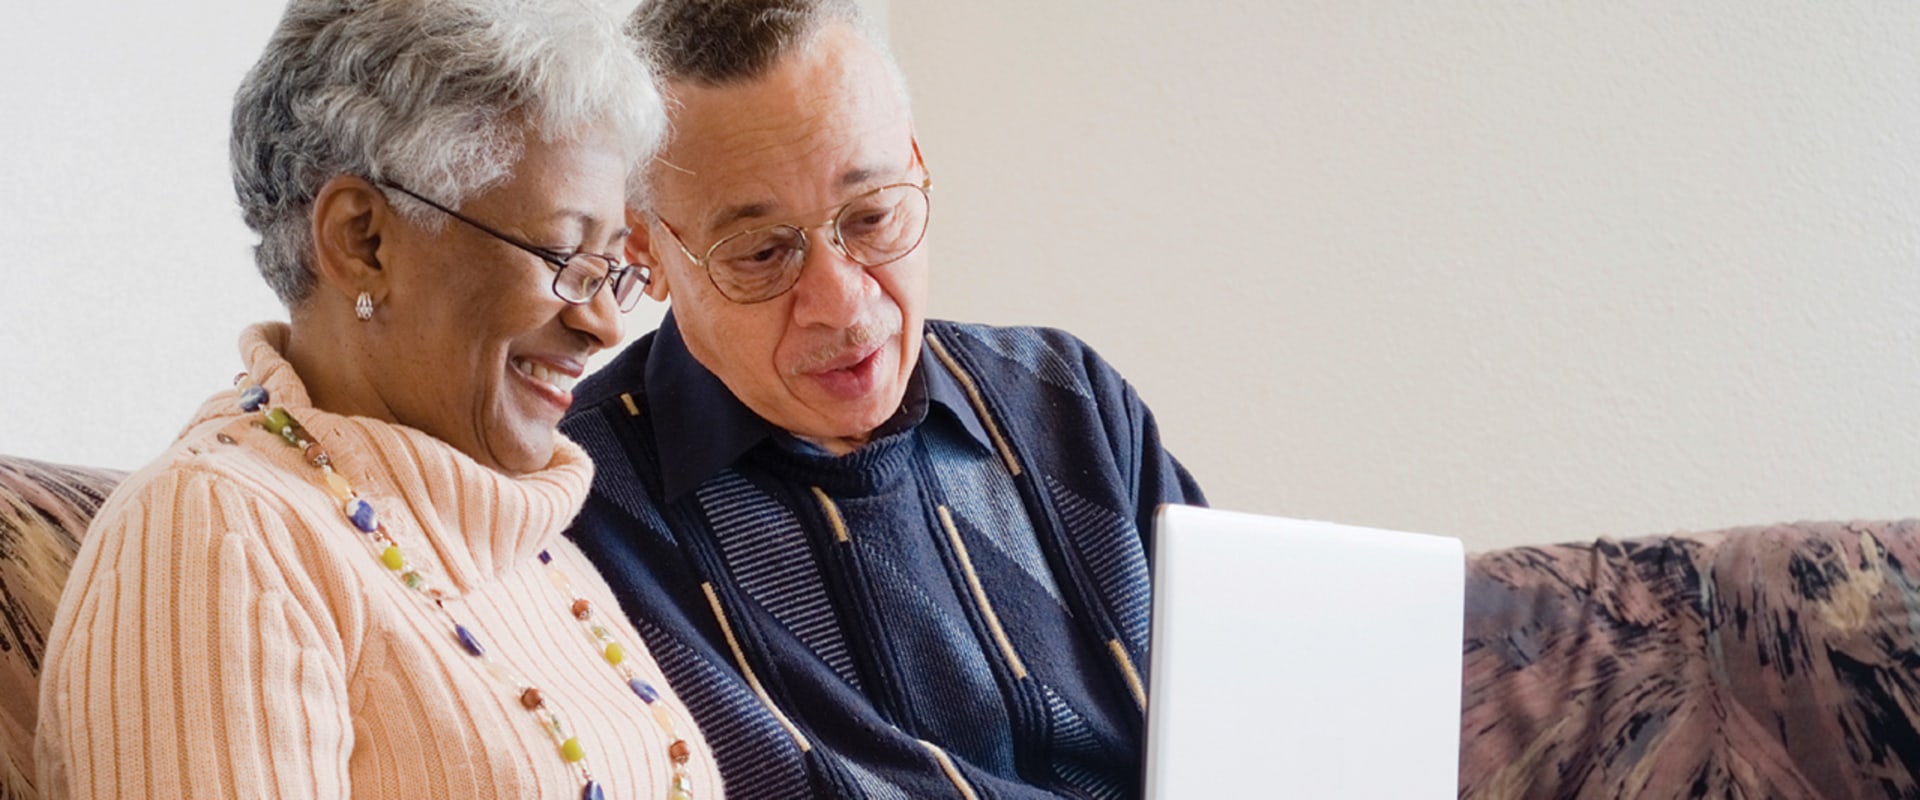 Identifying Needs and Goals for Home Care Services